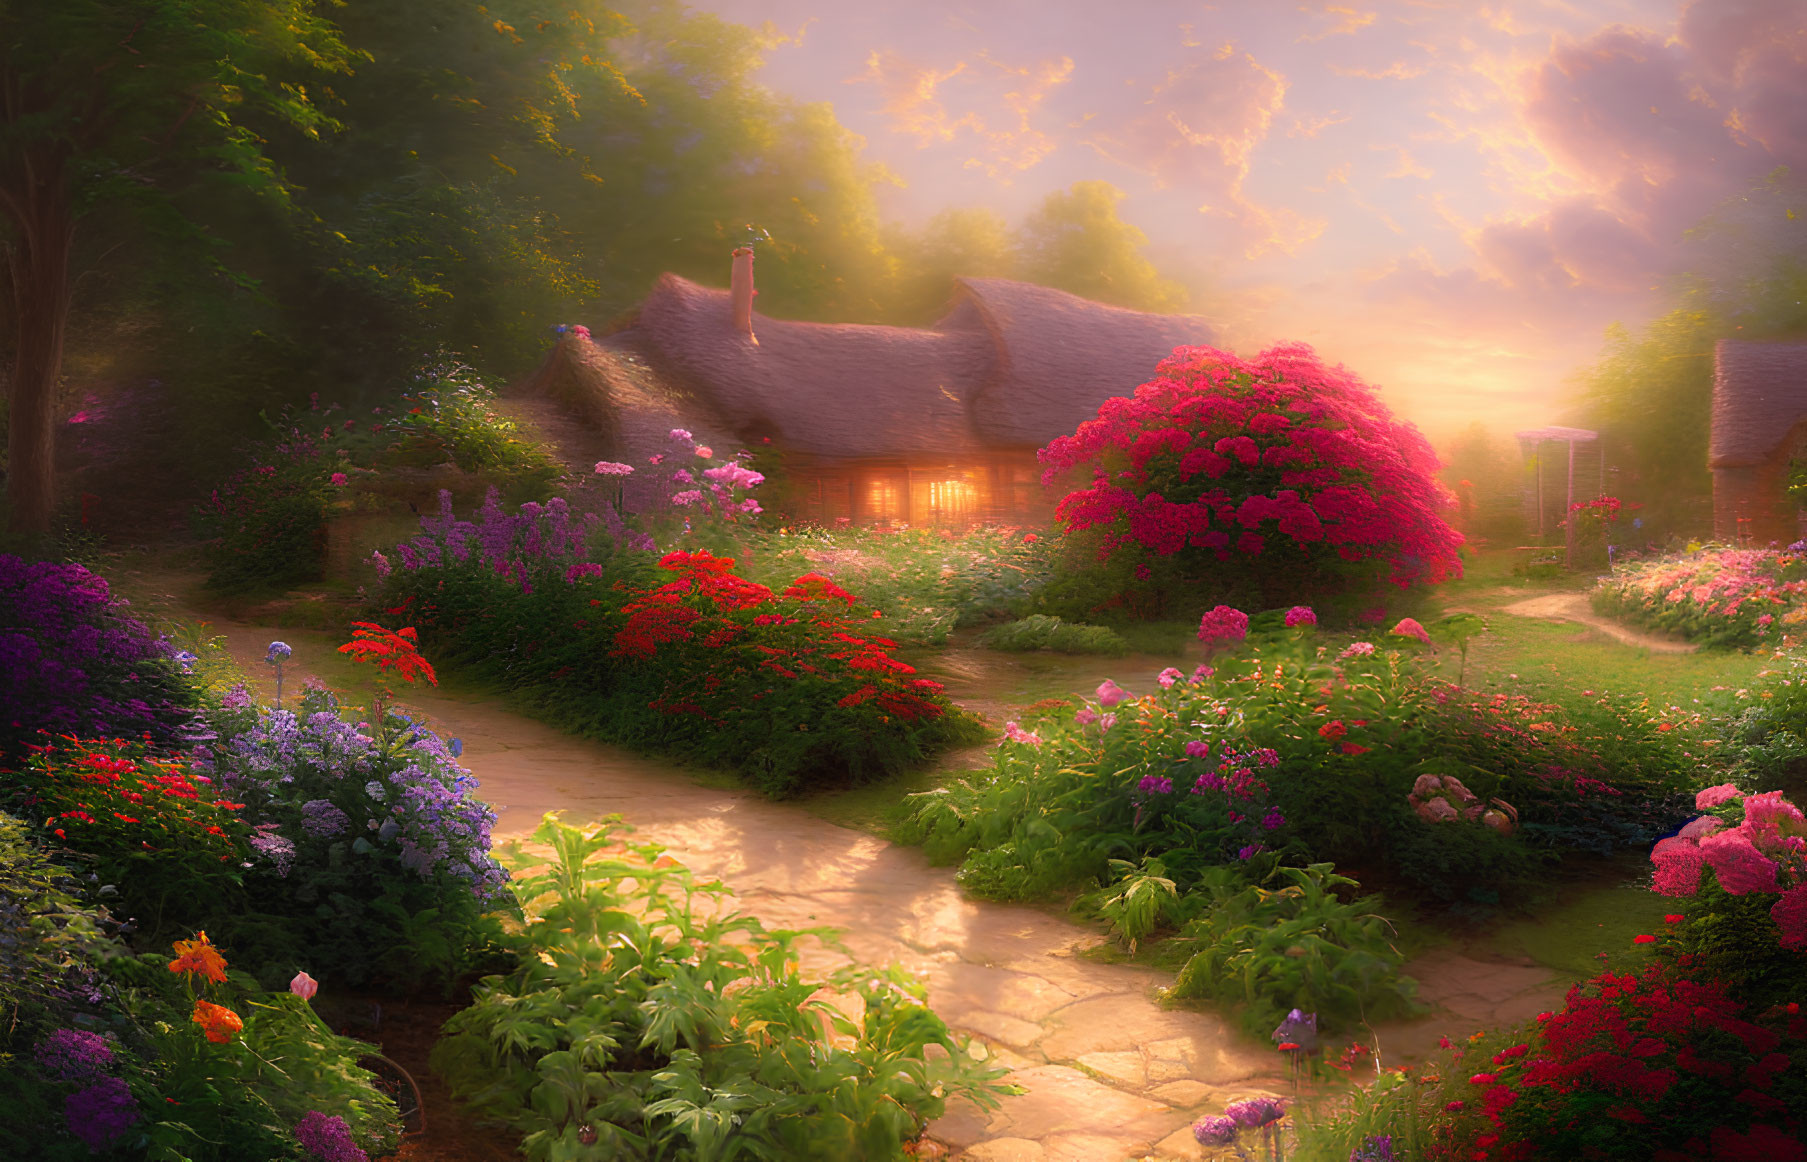 Thatched Cottage and Flowering Garden at Sunset